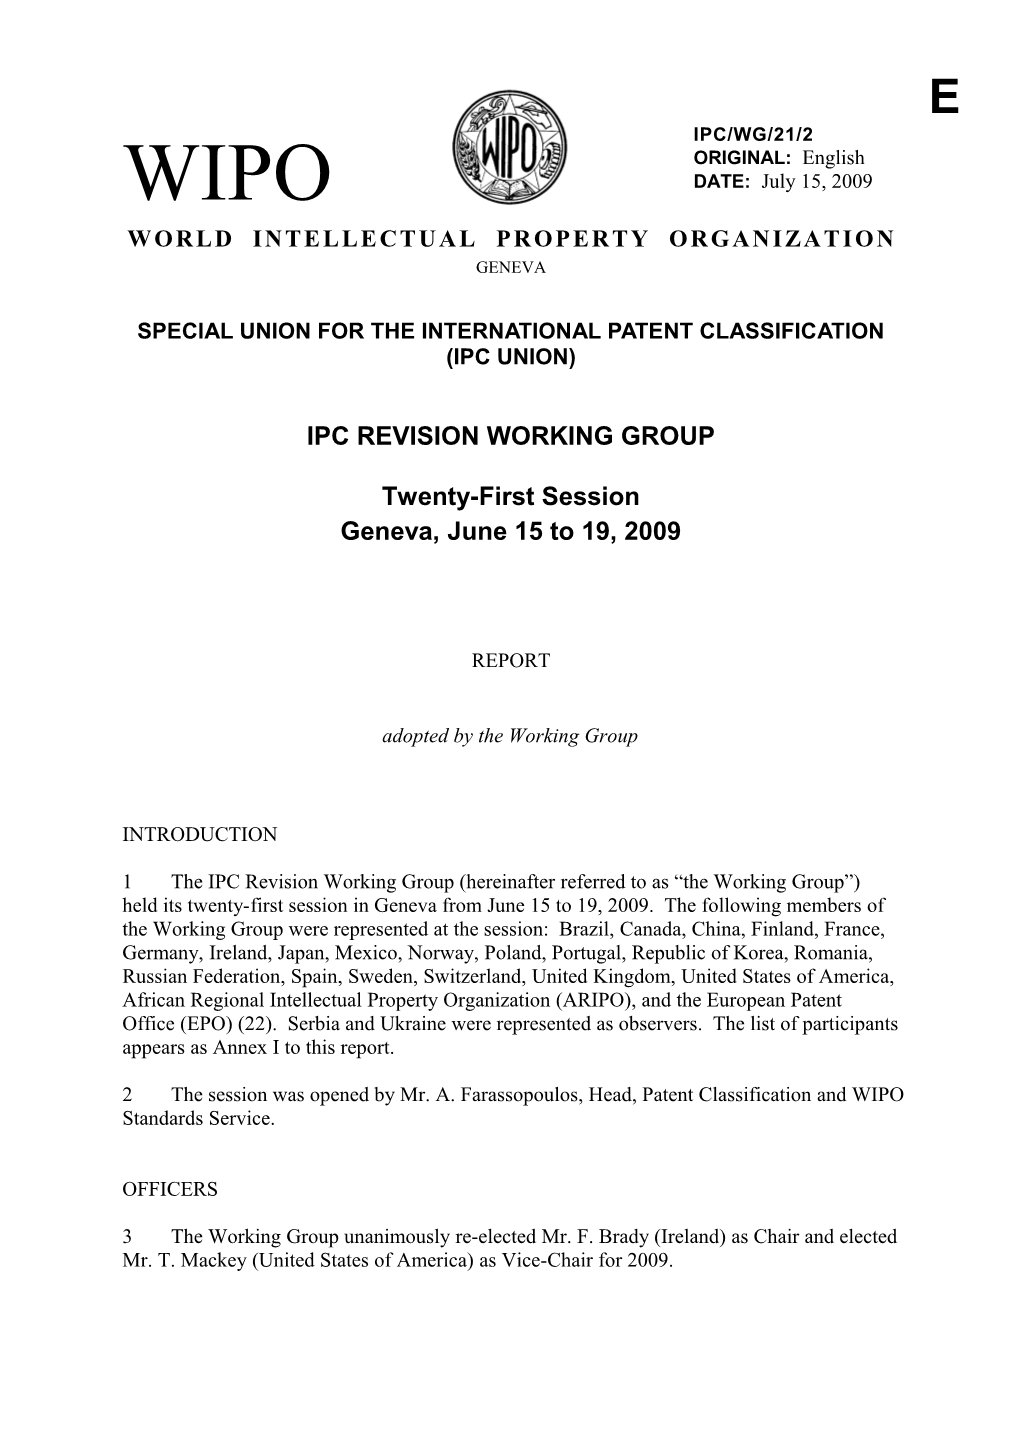 IPC/WG/21/2 - Report of the 21St Session of the IPC Revision Working Group